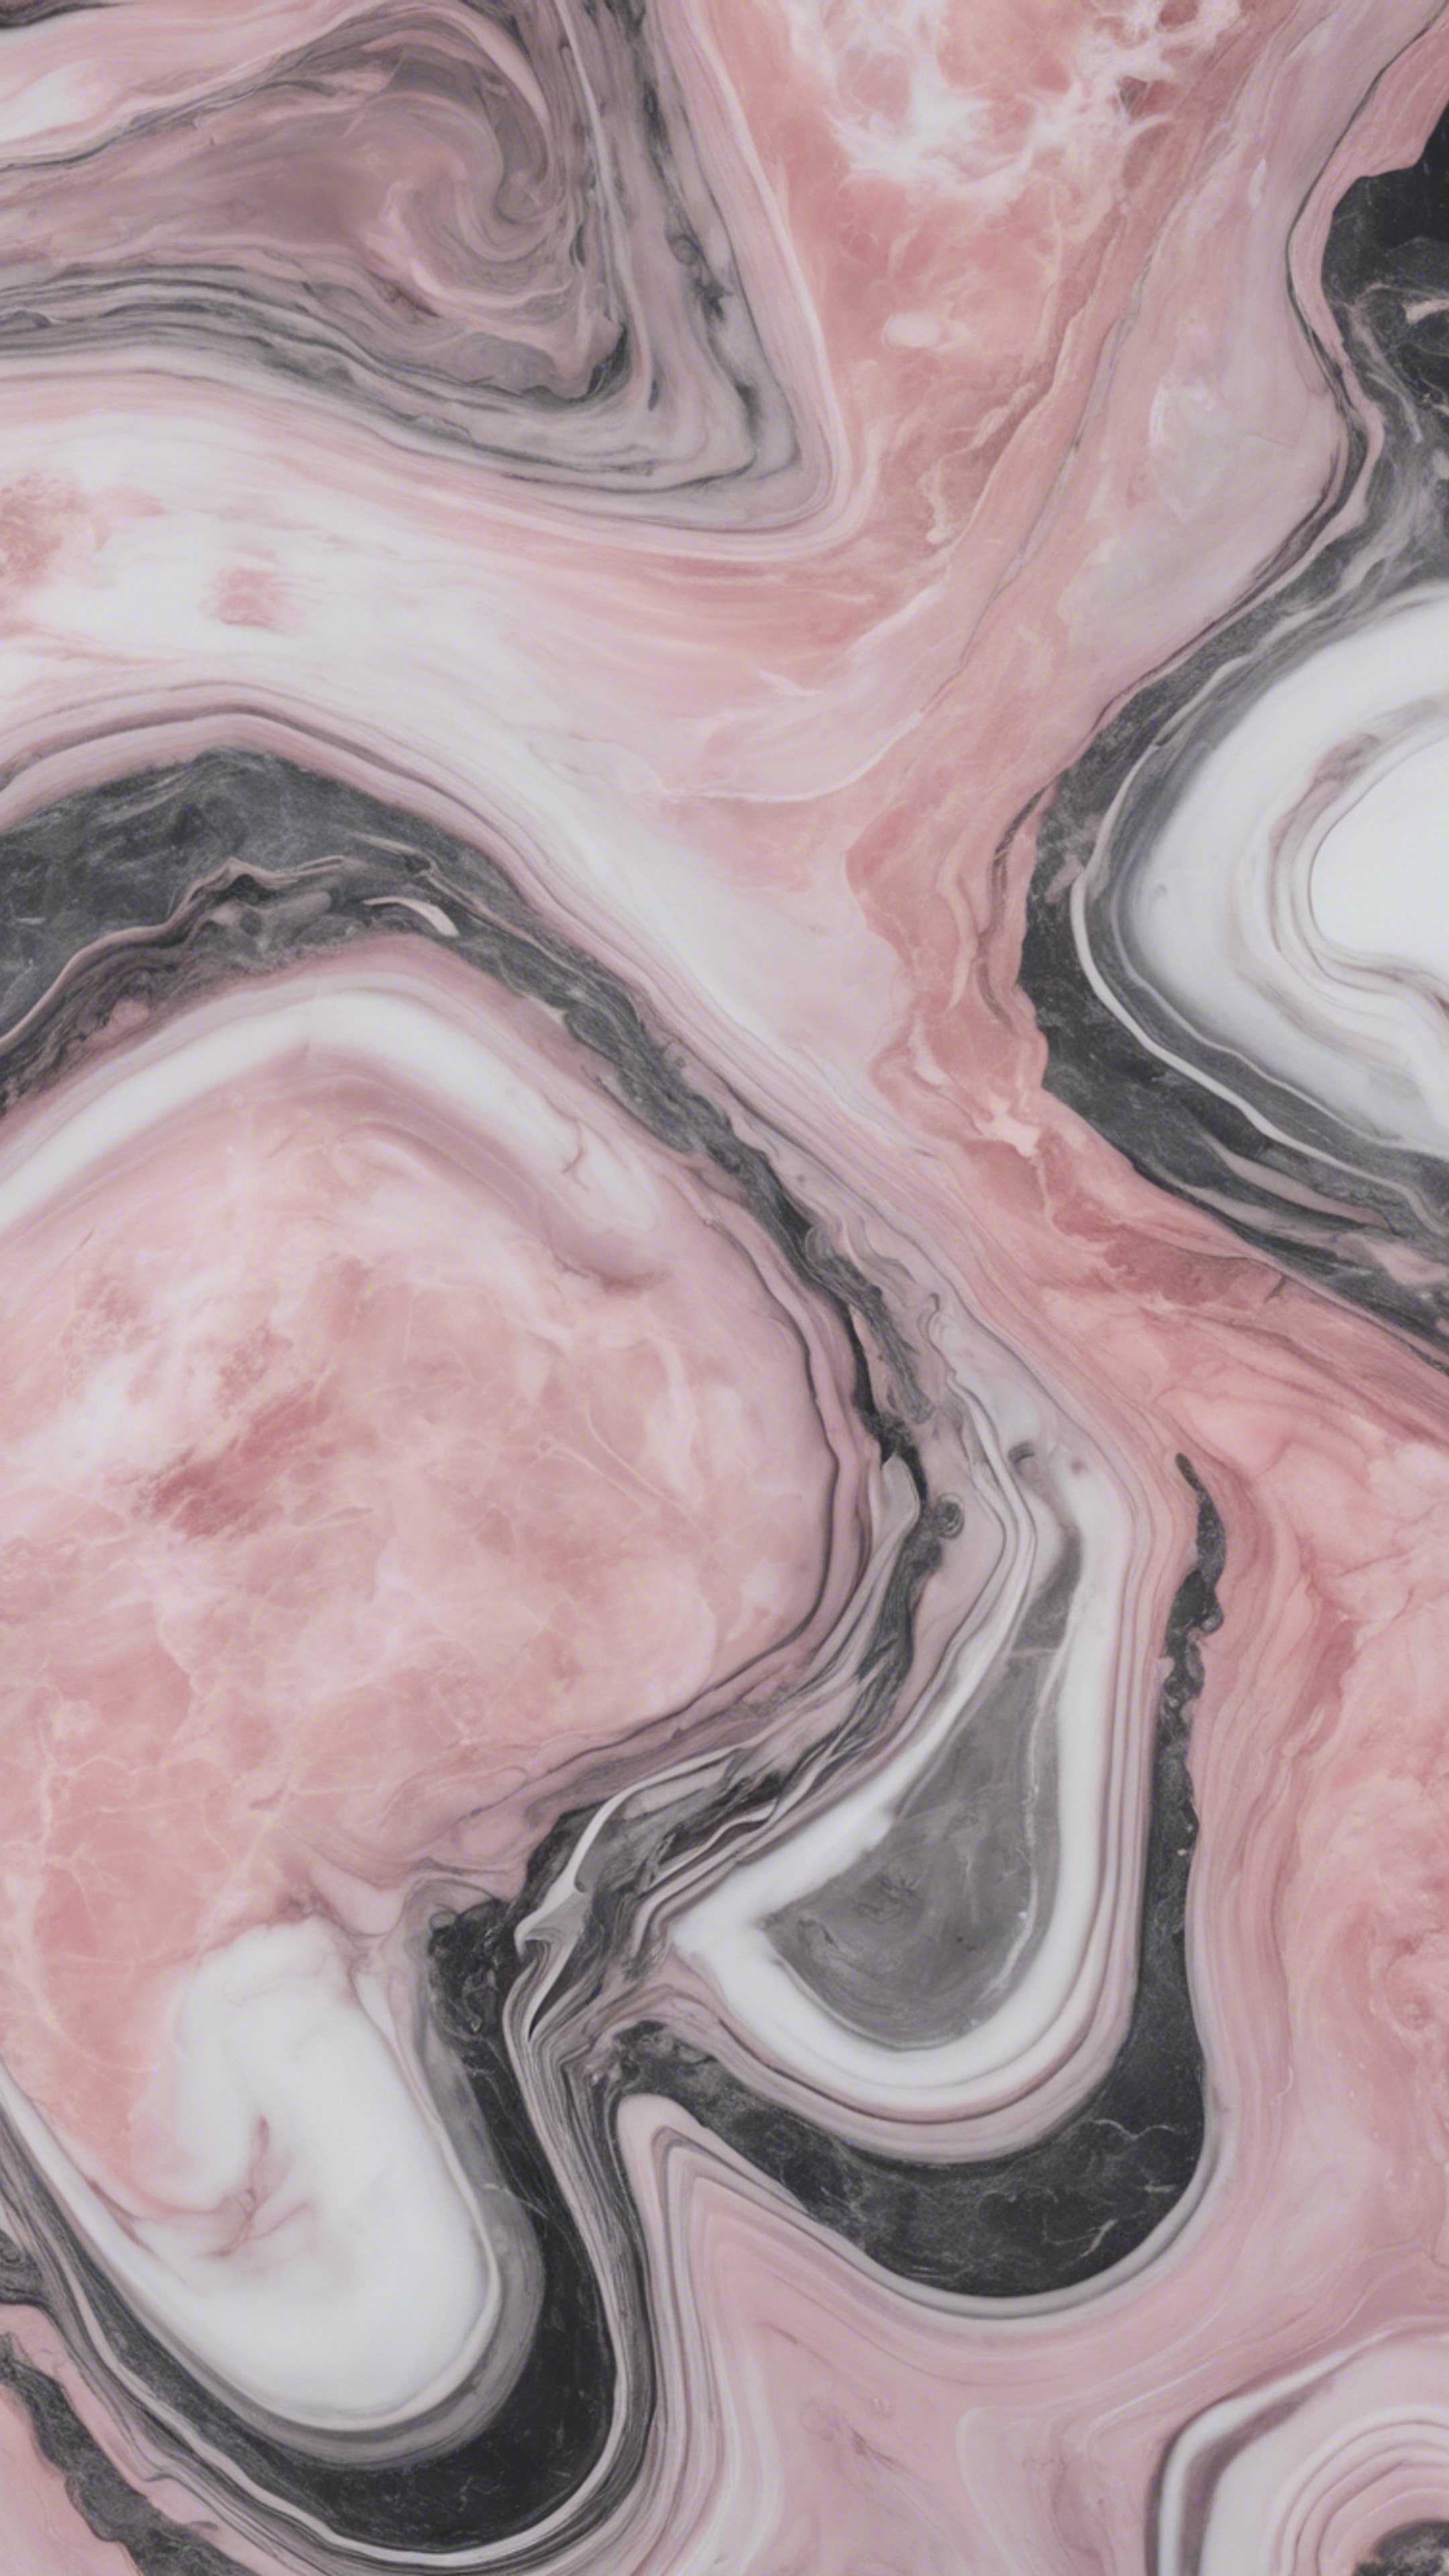 A swirling pattern of pink, white, and charcoal grey characteristic of polished pink marble. Fond d'écran[fb90daec103040ffbaff]